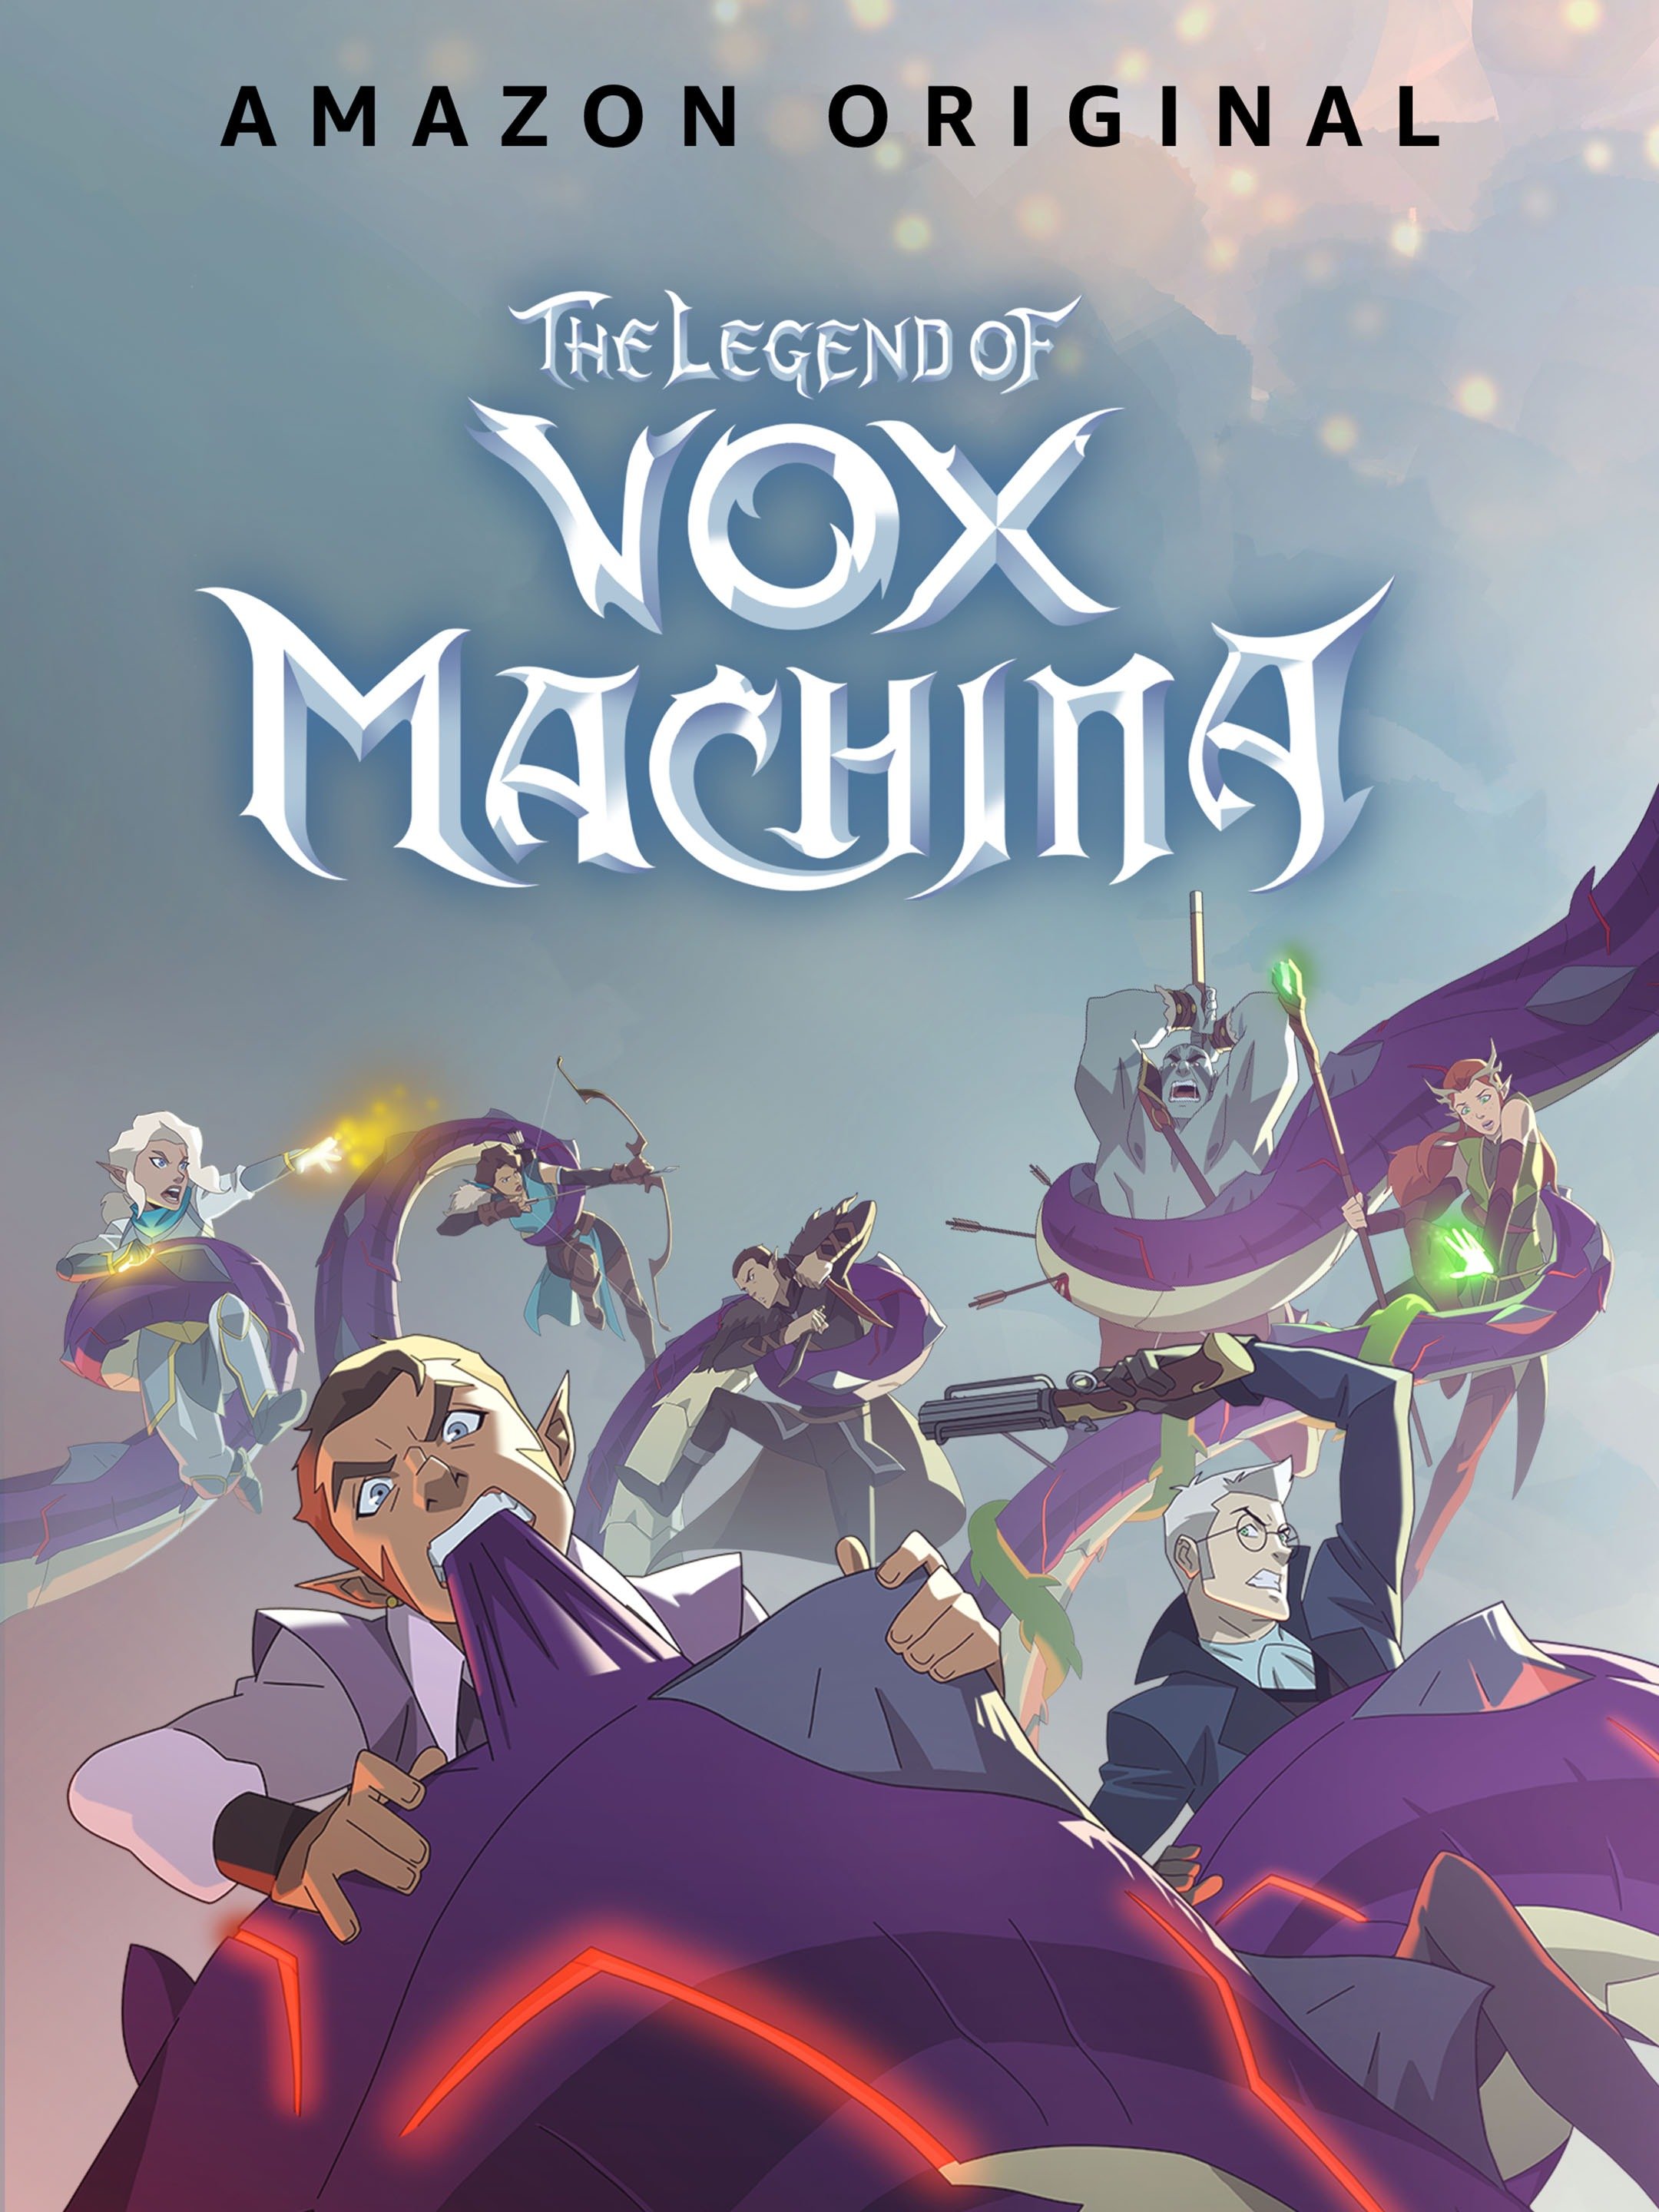 How animation brought Critical Roles Legend of Vox Machina to life